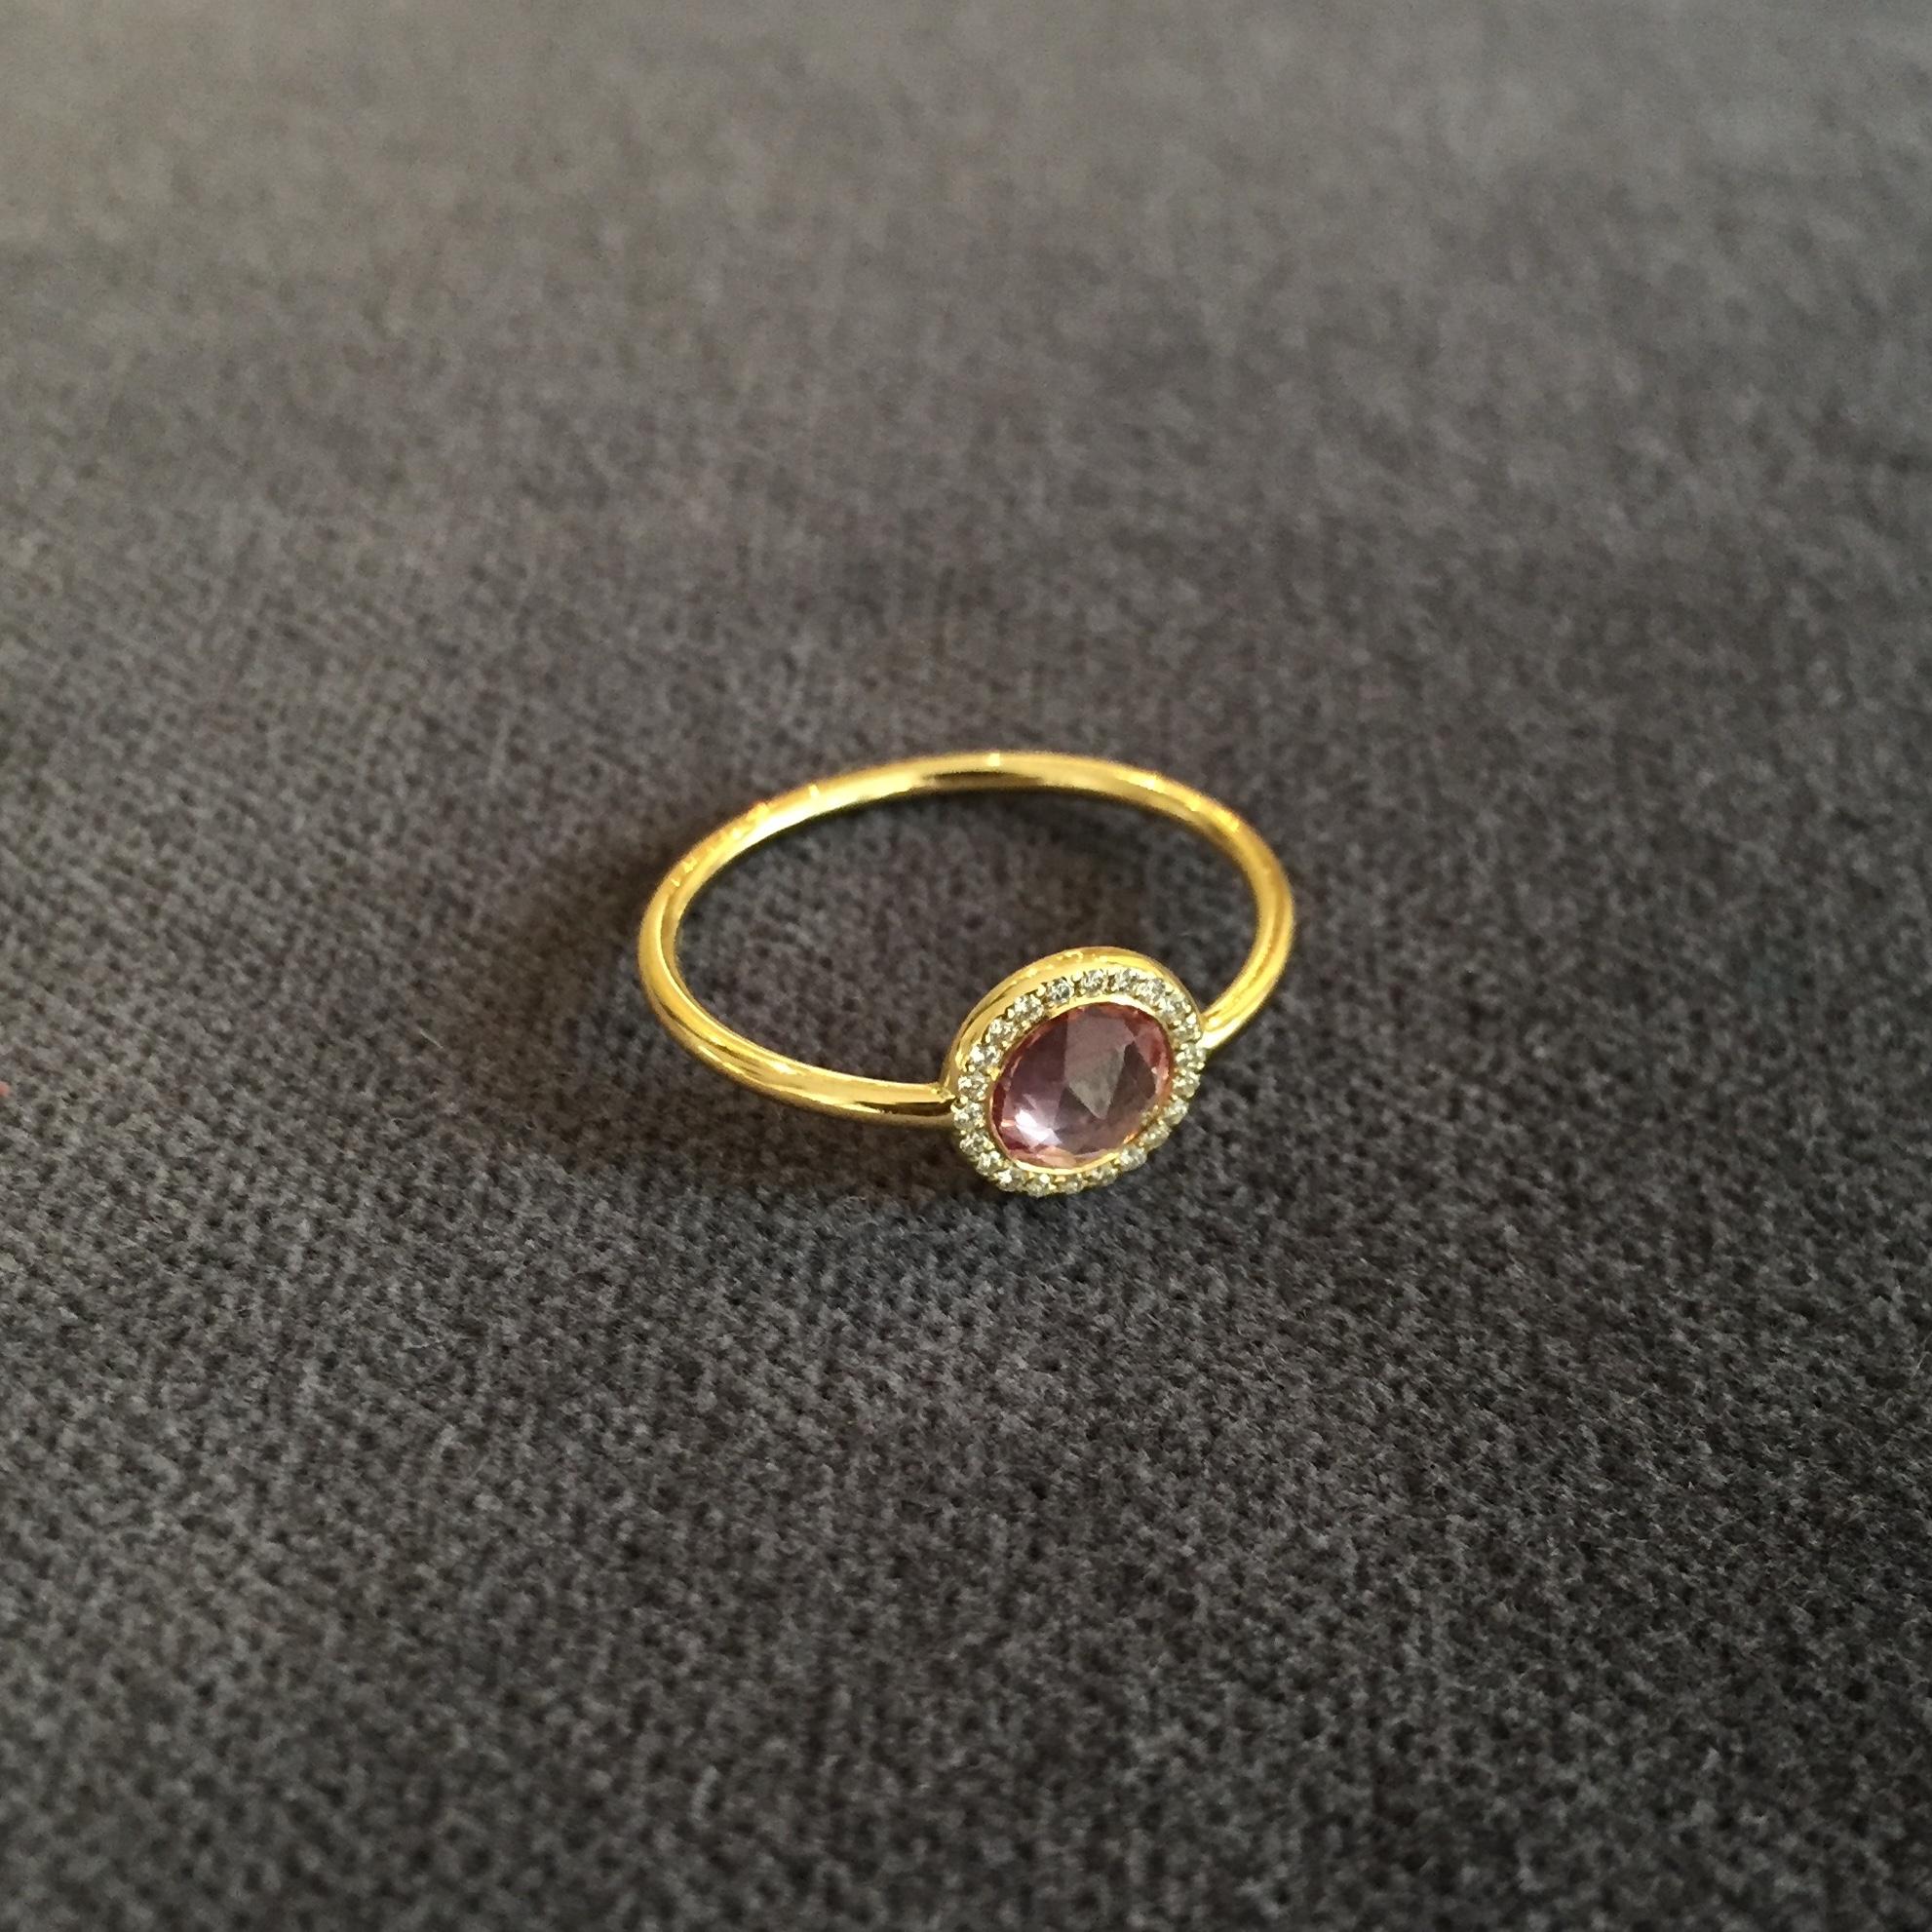 A one of a kind engagement ring from Sweet Pea made in 18k yellow gold. The pink rose cut 0.69ct sapphire is encircled by white diamonds with a total weight of 0.05ct. This ring is a UK size L.

This stunning unique 18ct yellow gold ring is set with